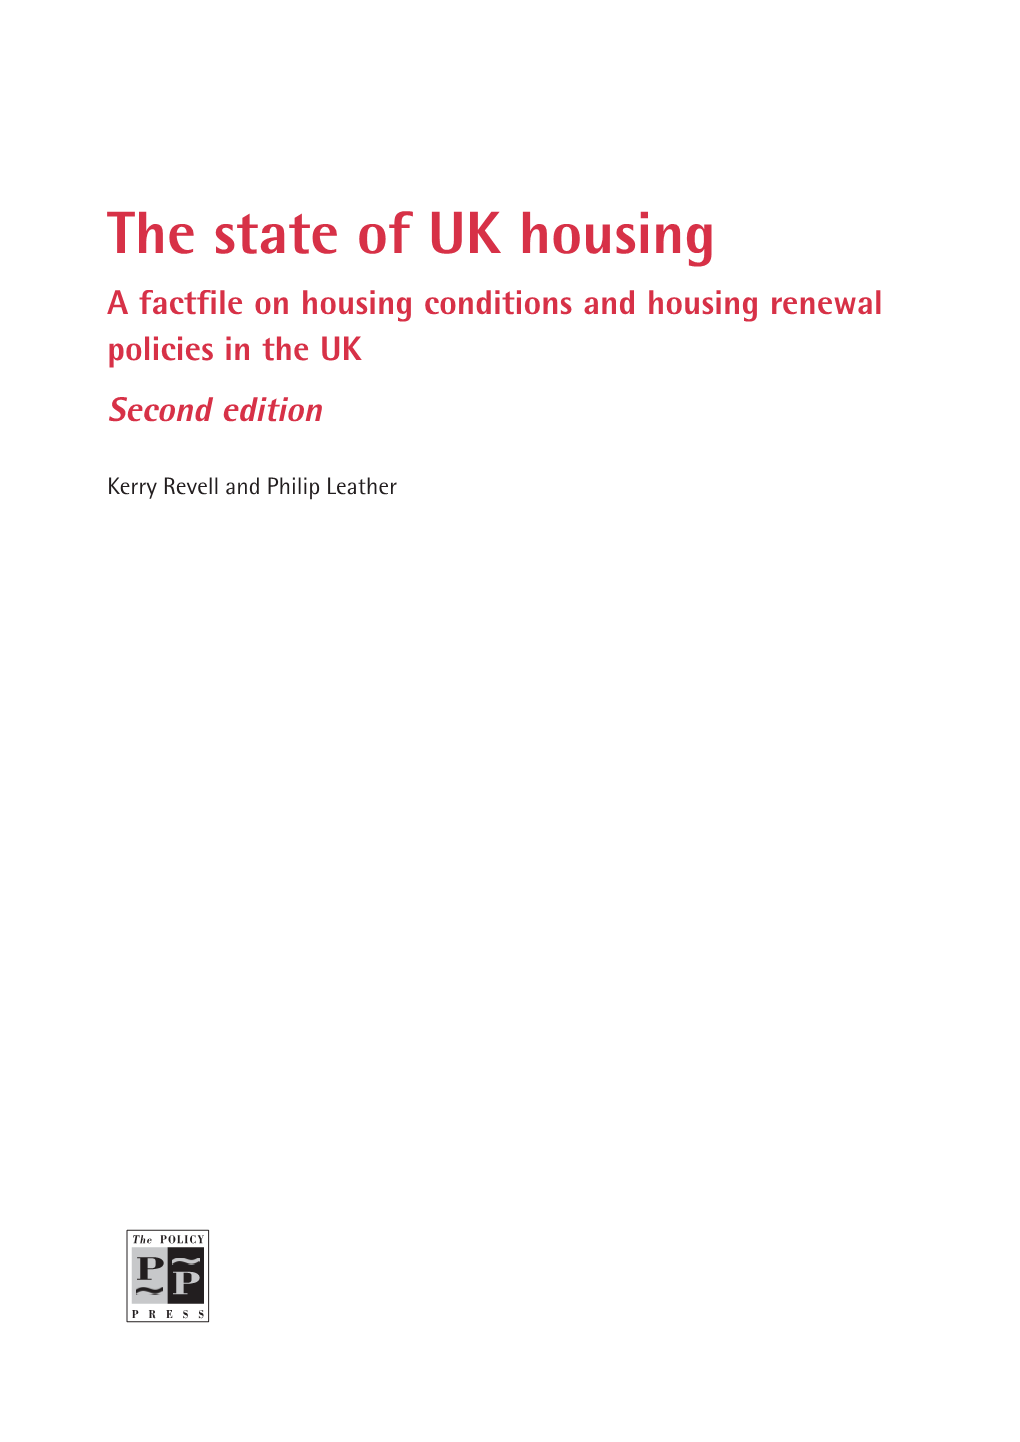 The State of UK Housing a Factfile on Housing Conditions and Housing Renewal Policies in the UK Second Edition